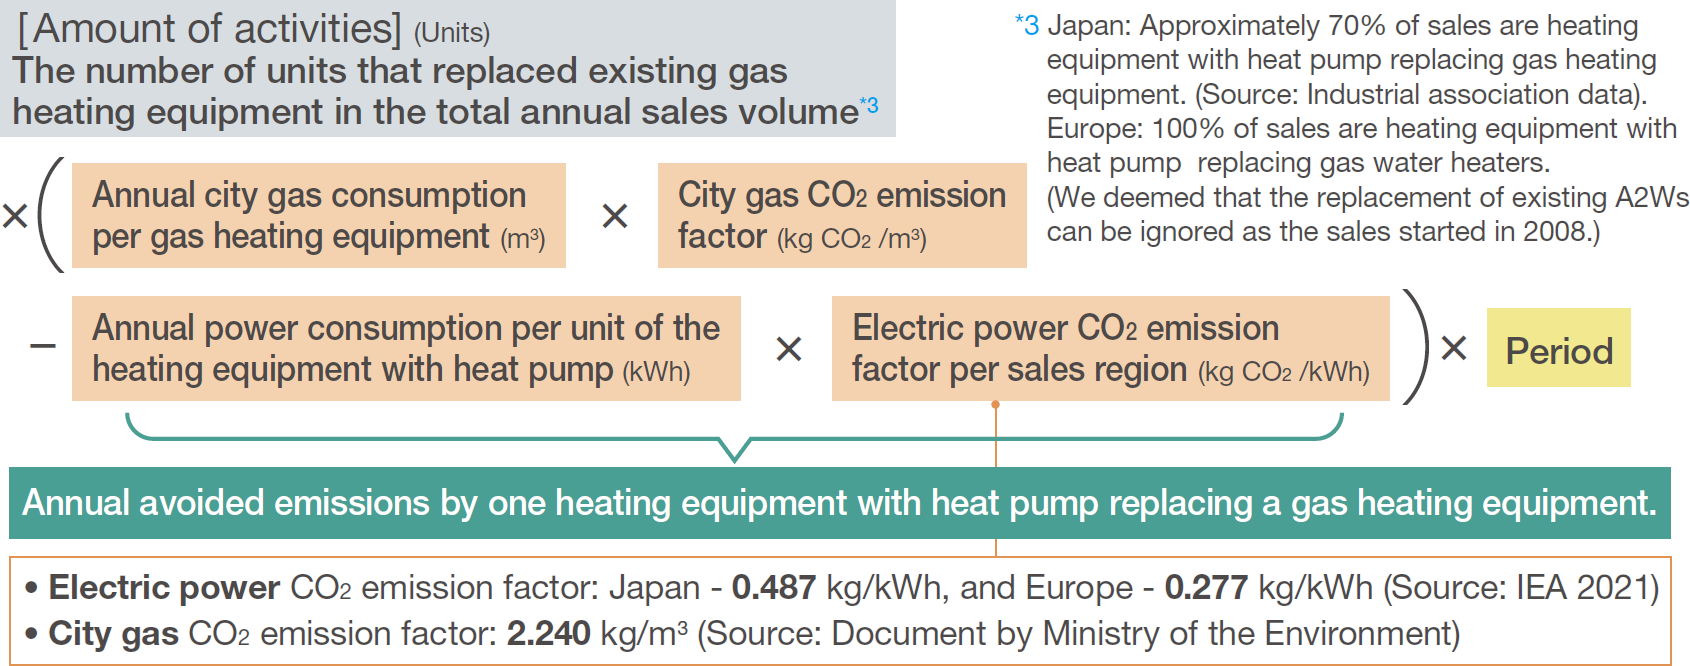 [Amount of activities] (Units) The number of units that replaced existing gas heating equipment in the total annual sales volume*3 | *3Japan: Approximately 70% of sales are heating equipment with heat pump replacing gas heating equipment. (Source: Industrial association data). Europe: 100% of sales are heating equipment with heat pump replacing gas water heaters. (We deemed that the replacement of existing A2Ws can be ignored as the sales started in 2008.) |  * (Annual city gas consumption per gas heating equipment (m3) *gas CO2 emission factor (kg CO2 /m3) - Annual power consumption per unit of the heating equipment with heat pump (kWh) * Electric power CO2 emission factor per sales region (kg CO2 /kWh)) * Period | Annual avoided emissions by one heating equipment with heat pump replacing a gas heating equipment. | /Electric power CO2 emission factor: Japan - 0.487 kg/kWh, and Europe - 0.277 kg/kWh (Source: IEA 2021)/City gas CO2 emission factor: 2.240 kg/m3 (Source: Document by Ministry of the Environment)